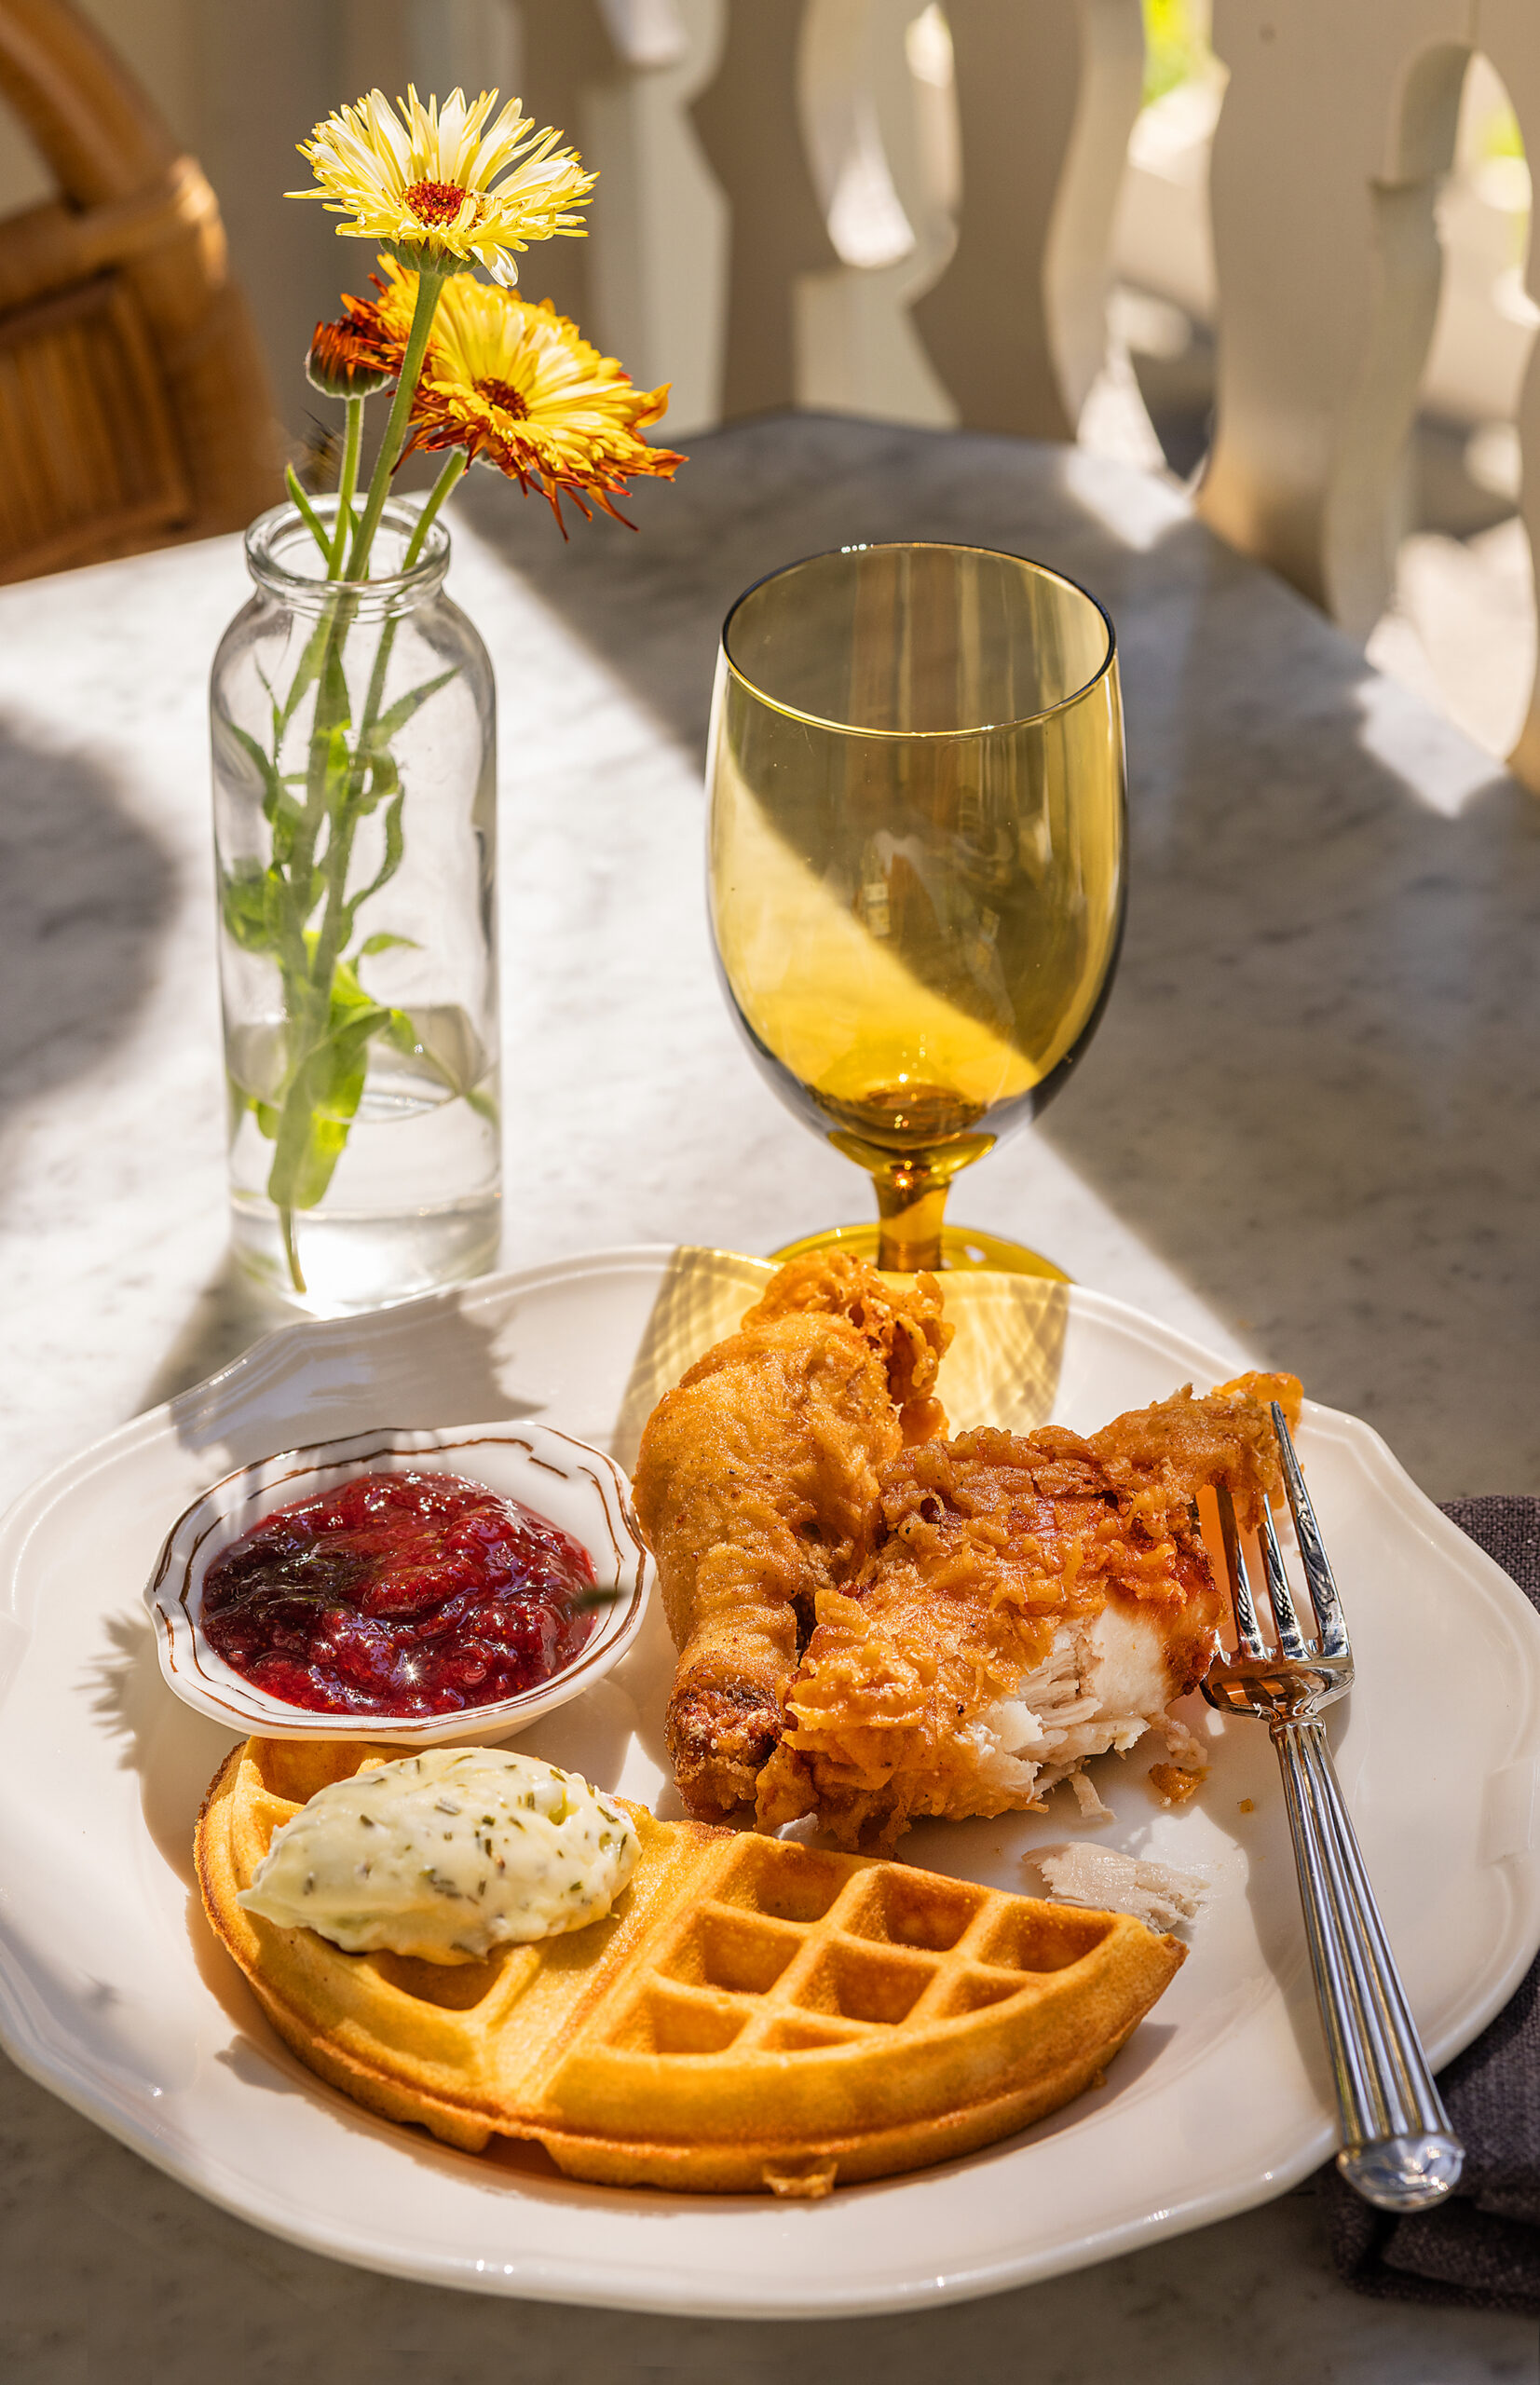 Fried chicken and waffles with strawberry jam and rosemary butter from the weekend brunch menu at The Madrona in Healdsburg, Friday, July 14, 2023.(John Burgess / The Press Democrat)